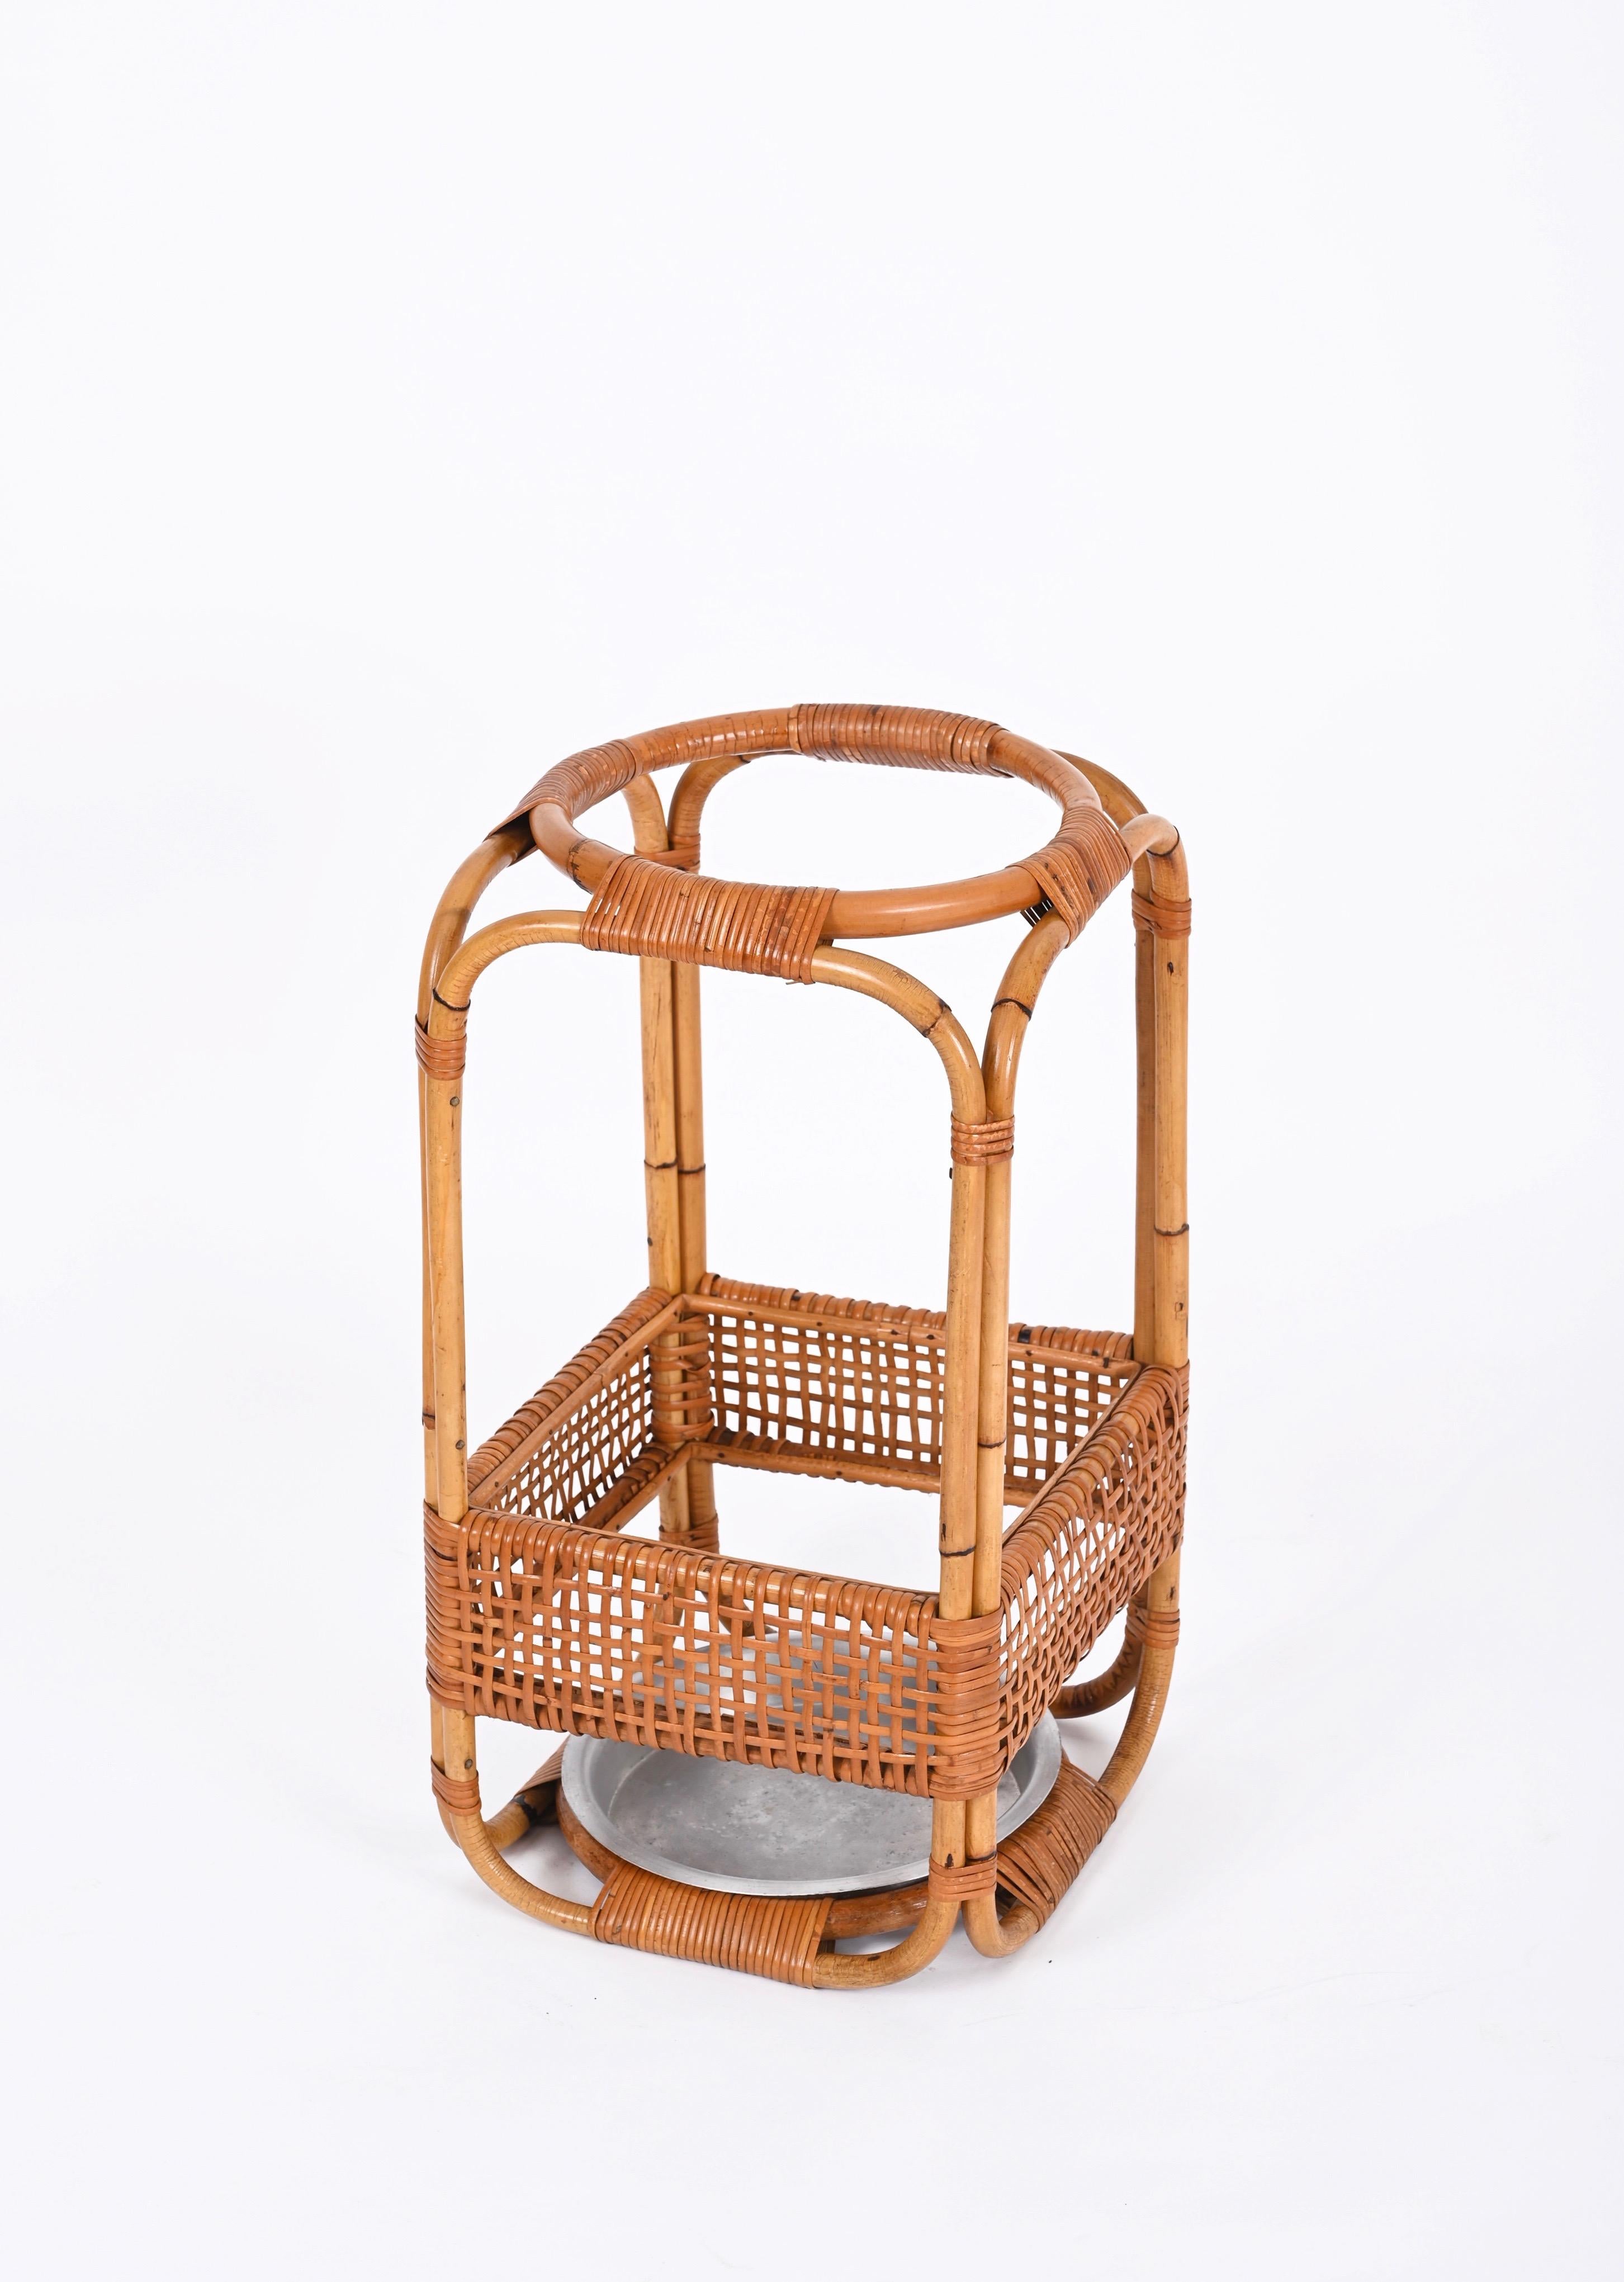 Bamboo and Wicker Umbrella Stand in the Style of Franco Albini, Italy, 1960s For Sale 10